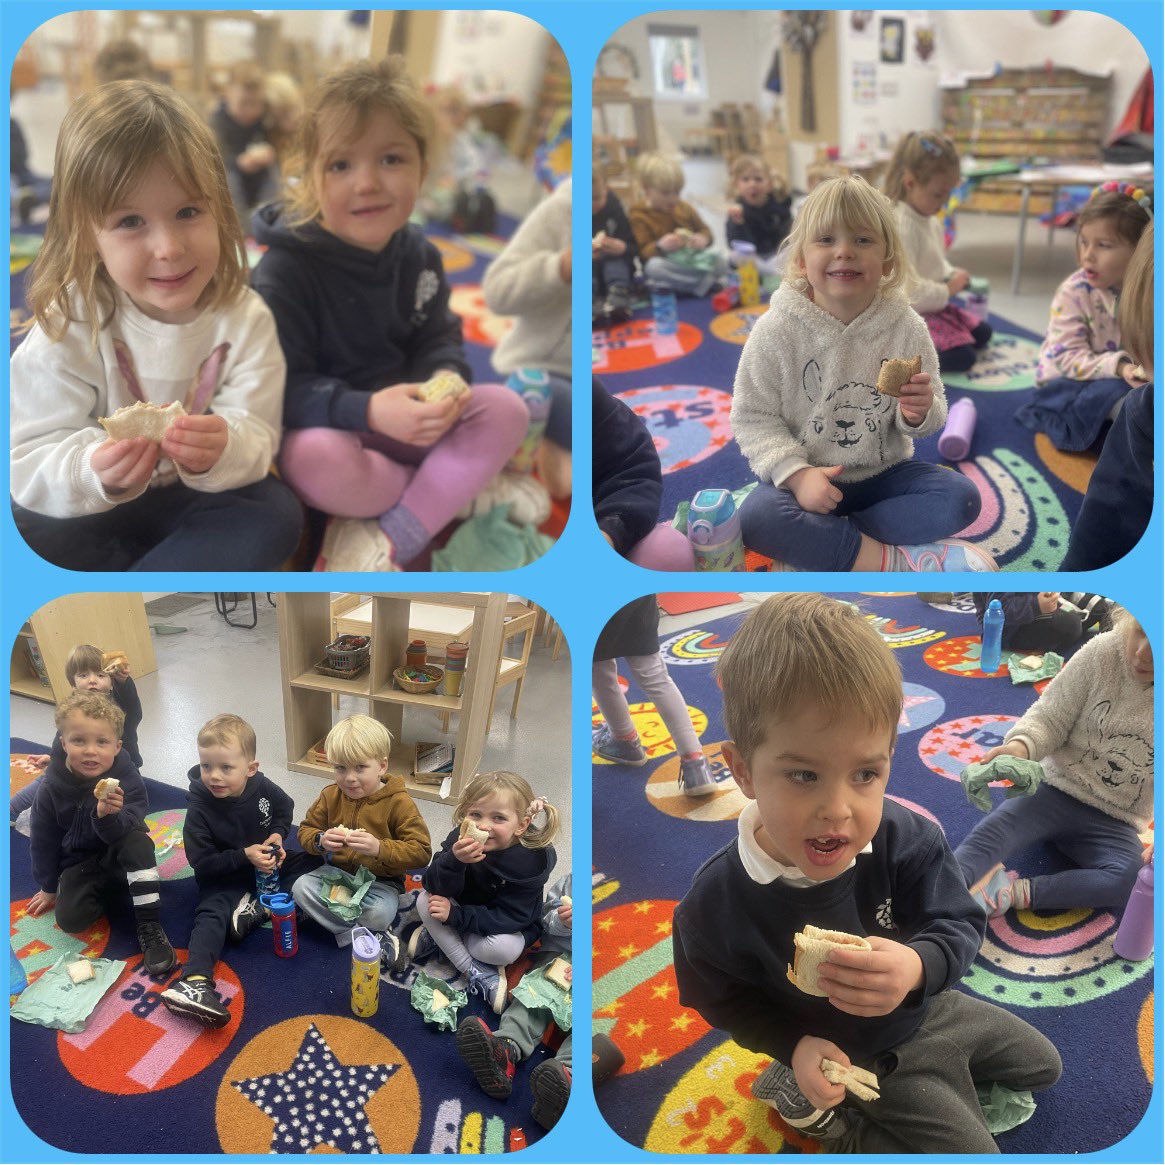 In Maths we are learning about number 4. Today we were introduced to four-sided shapes! So we decided to make delicious sandwiches and cut them in to squares 🟦😋💙@DanesfieldSchl